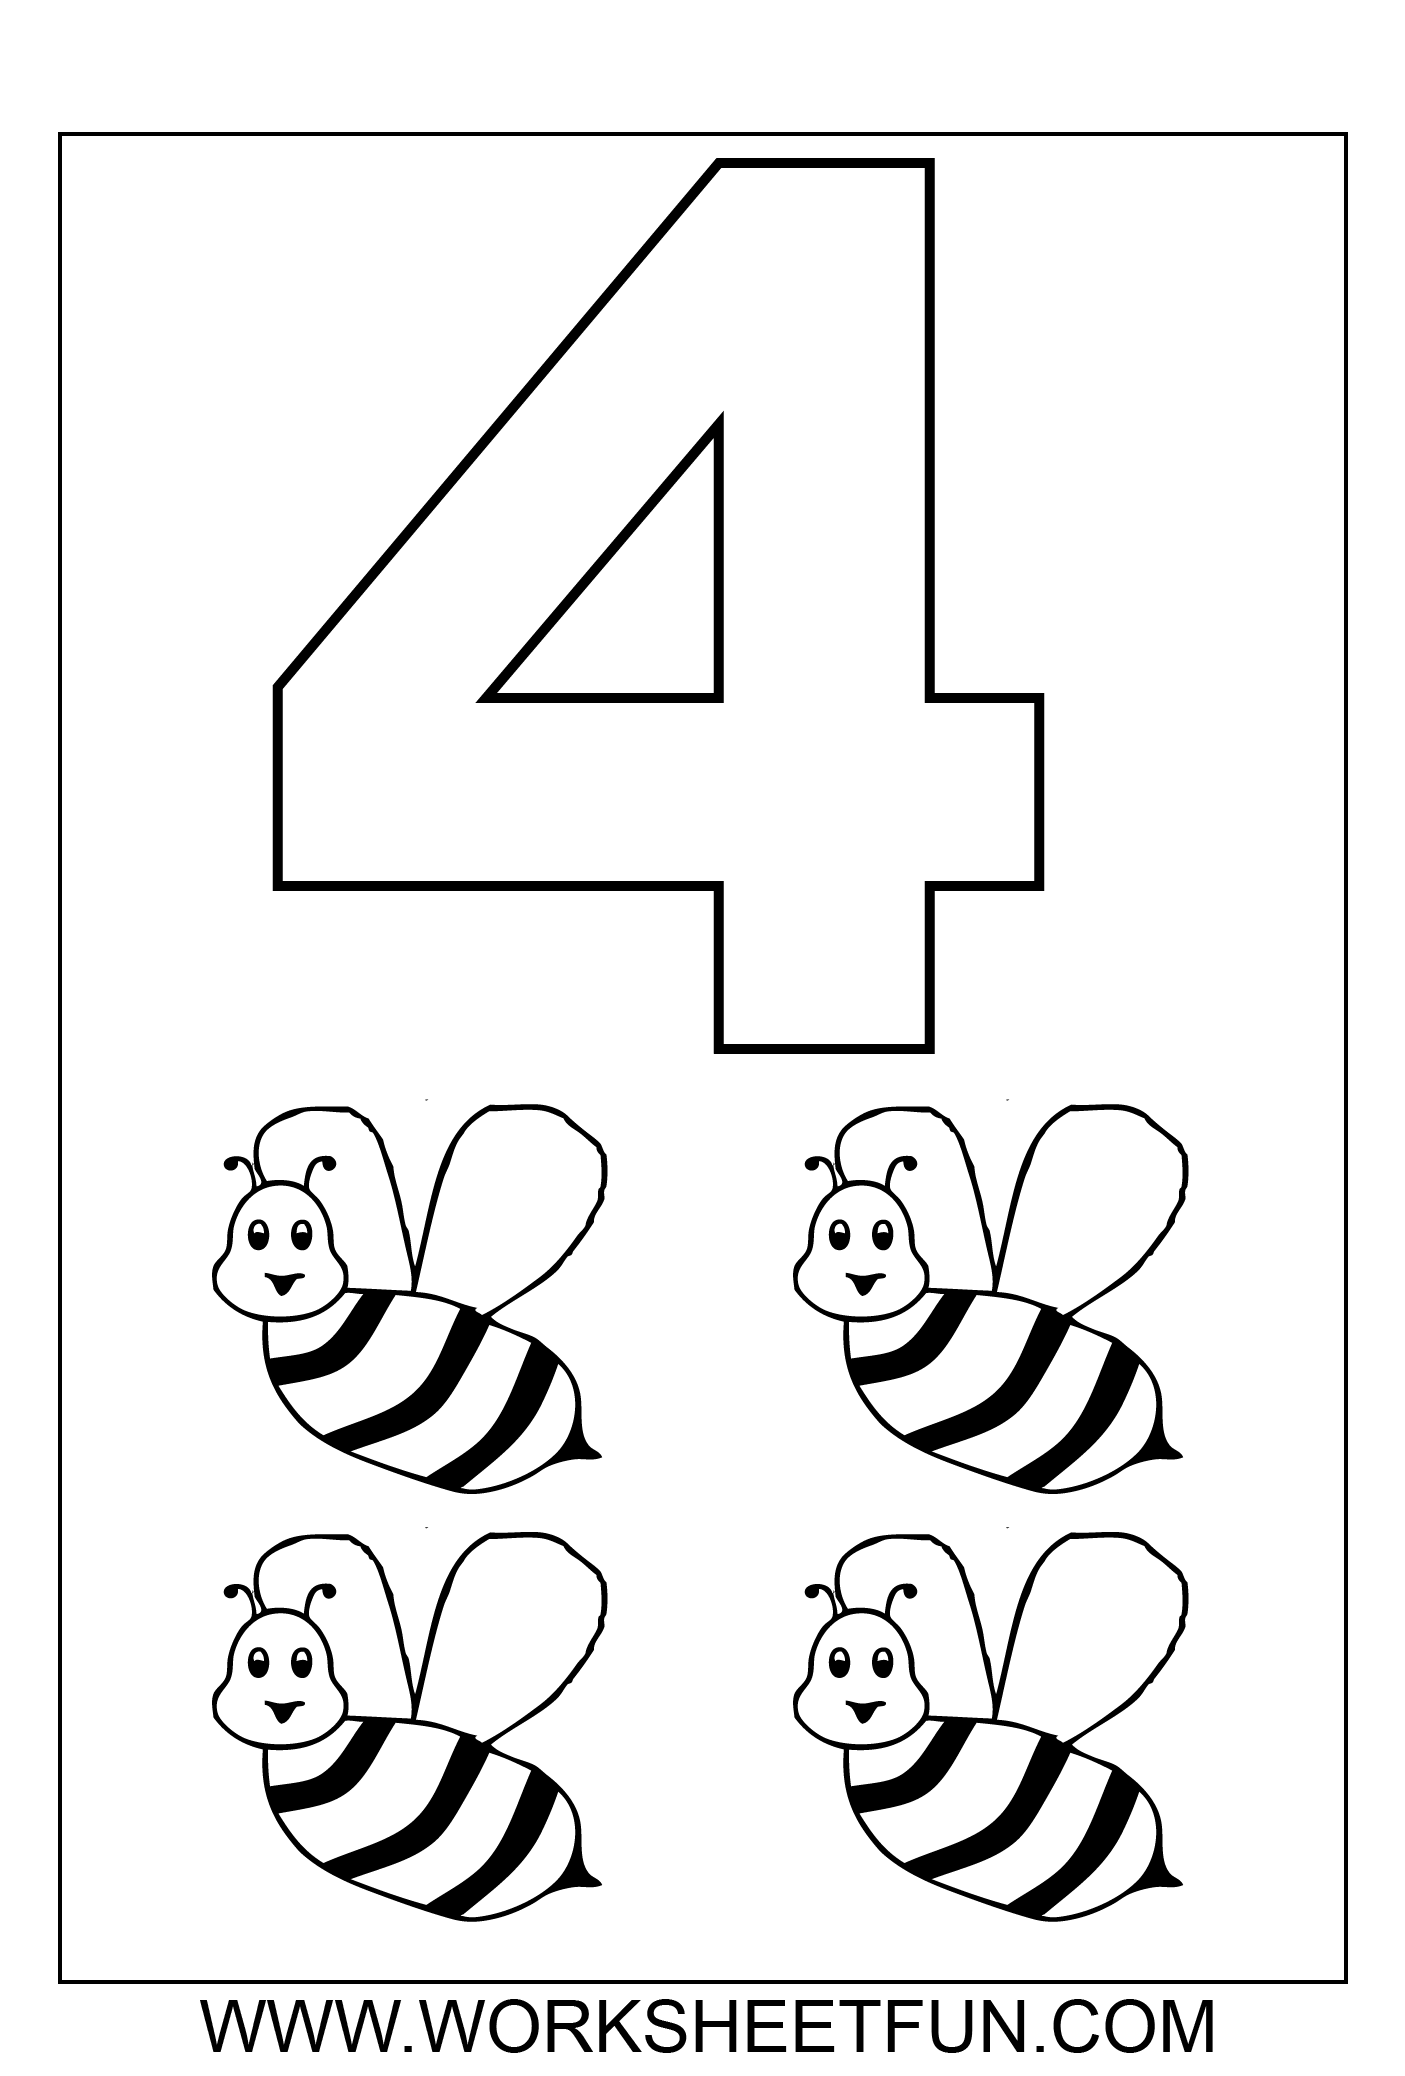 Coloring Pages Numbers - Colette Cockrel